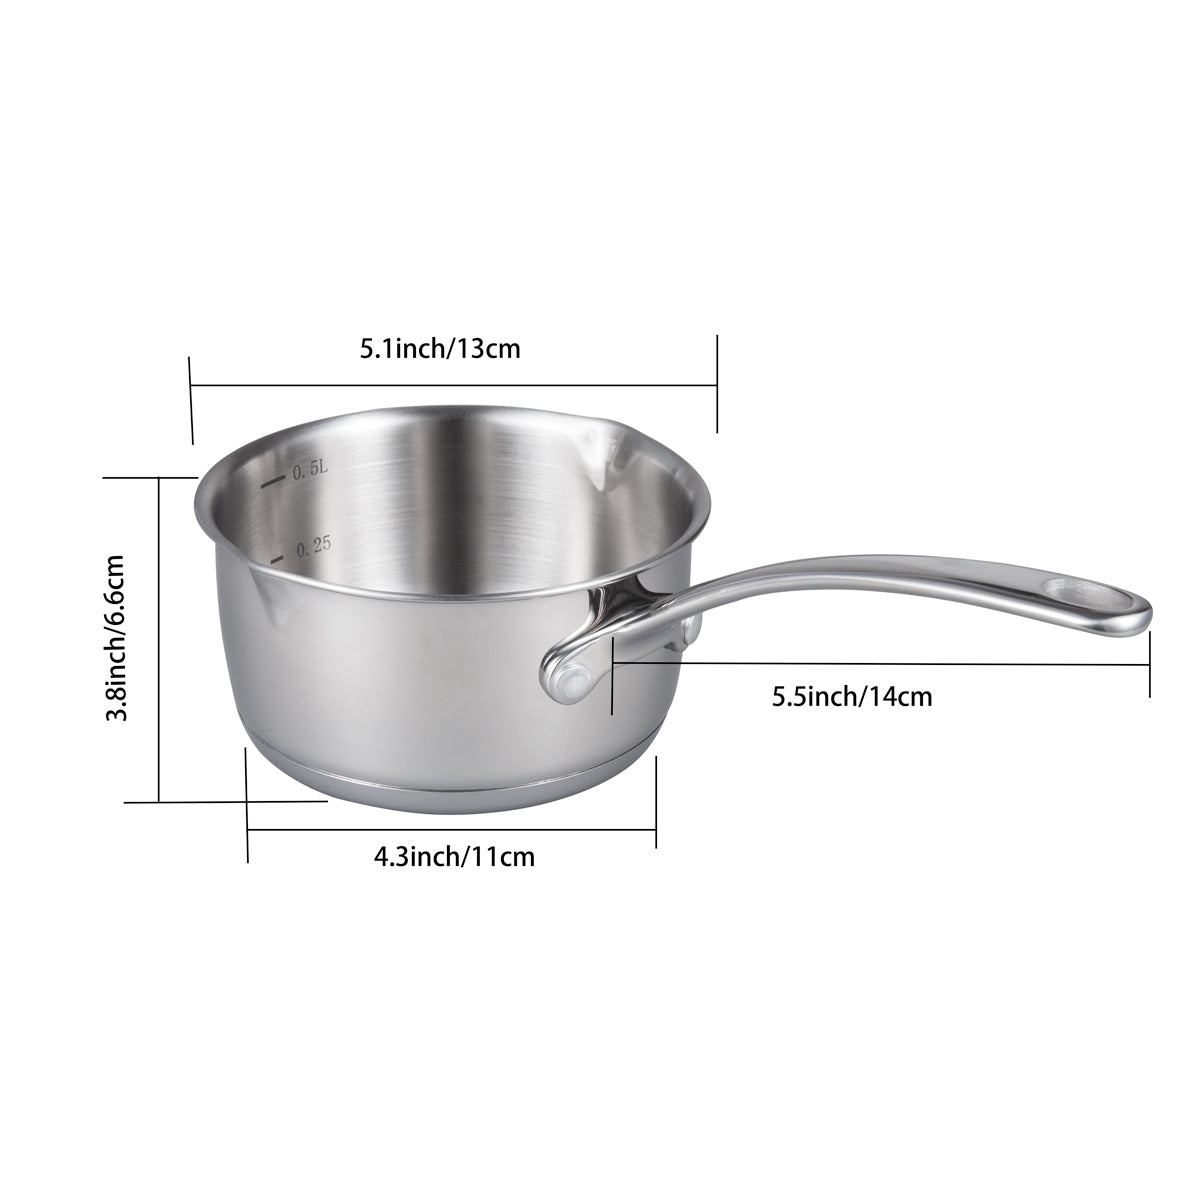 DEAYOU 18/10 Stainless Steel Butter Warmer Pan, 0.8-Quart Measuring  Saucepan with Dual Pour Spout, Small Milk Butter Melting Pot, Induction  Heavy